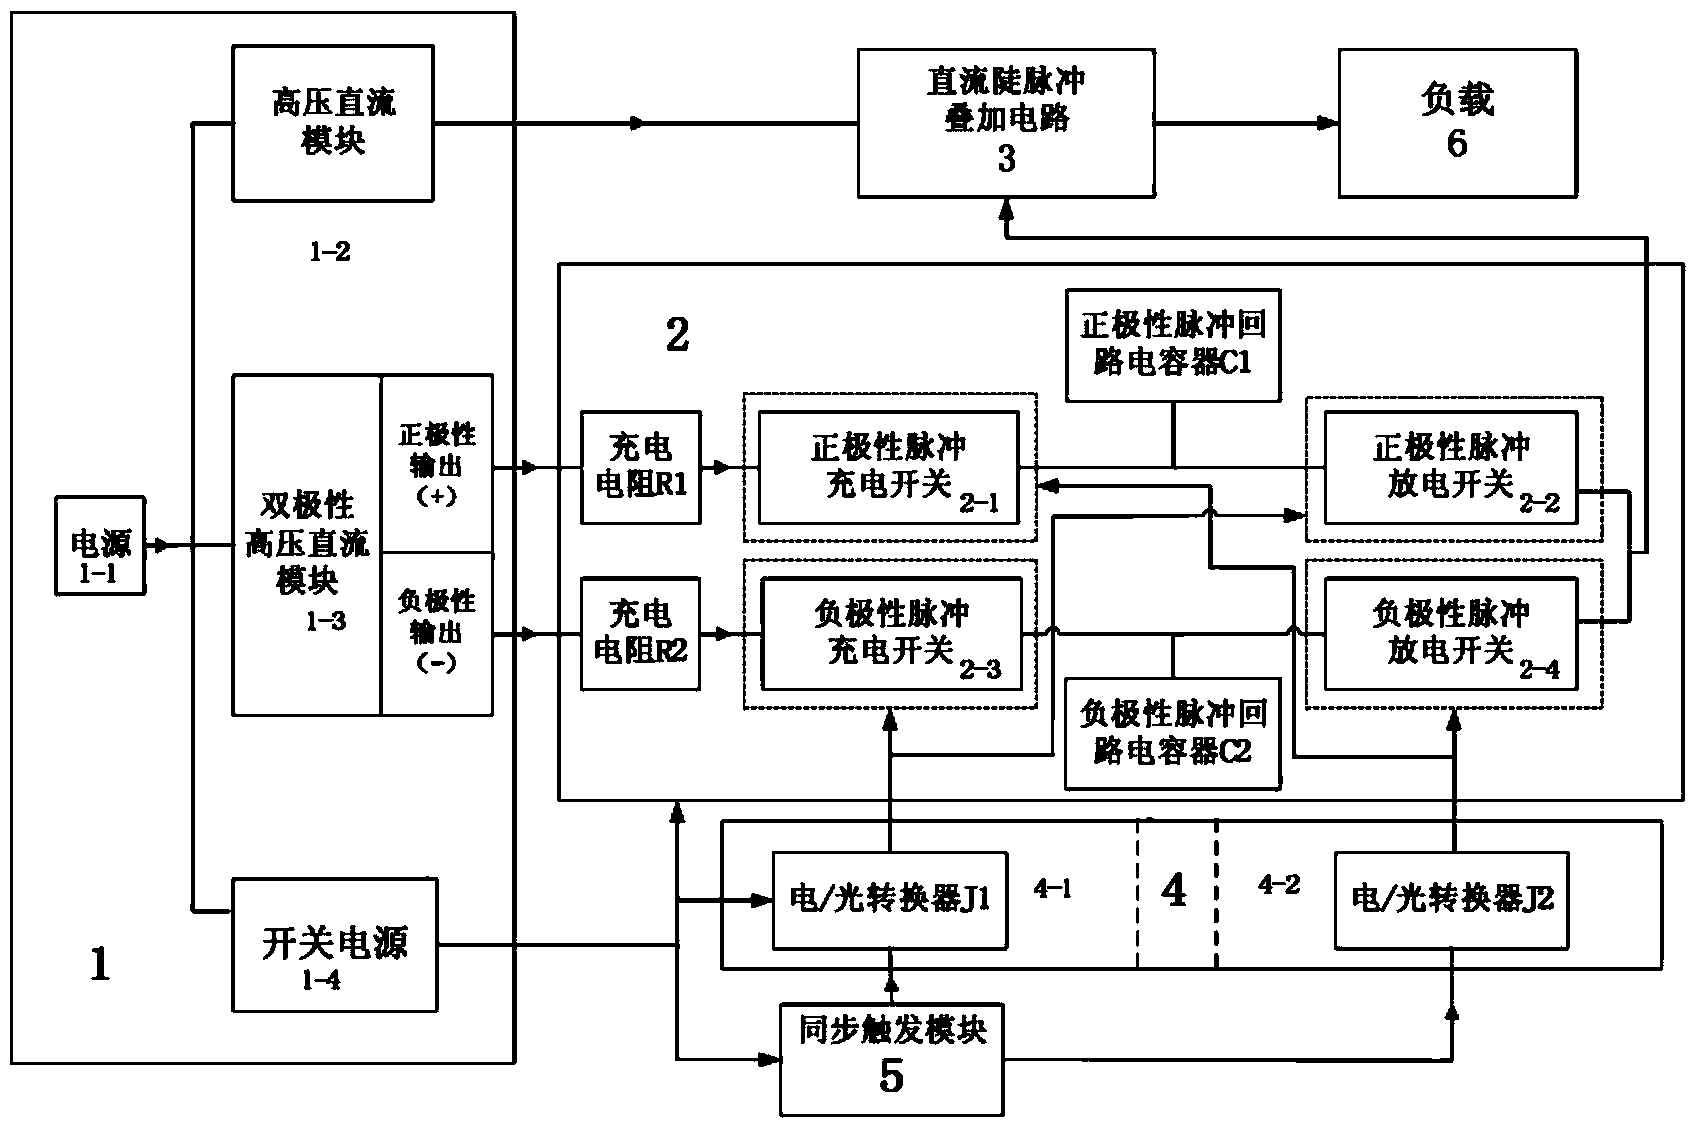 IGBT (insulated gate bipolar transistor) series connection based high-voltage pulse superposition direct-current electric field generator